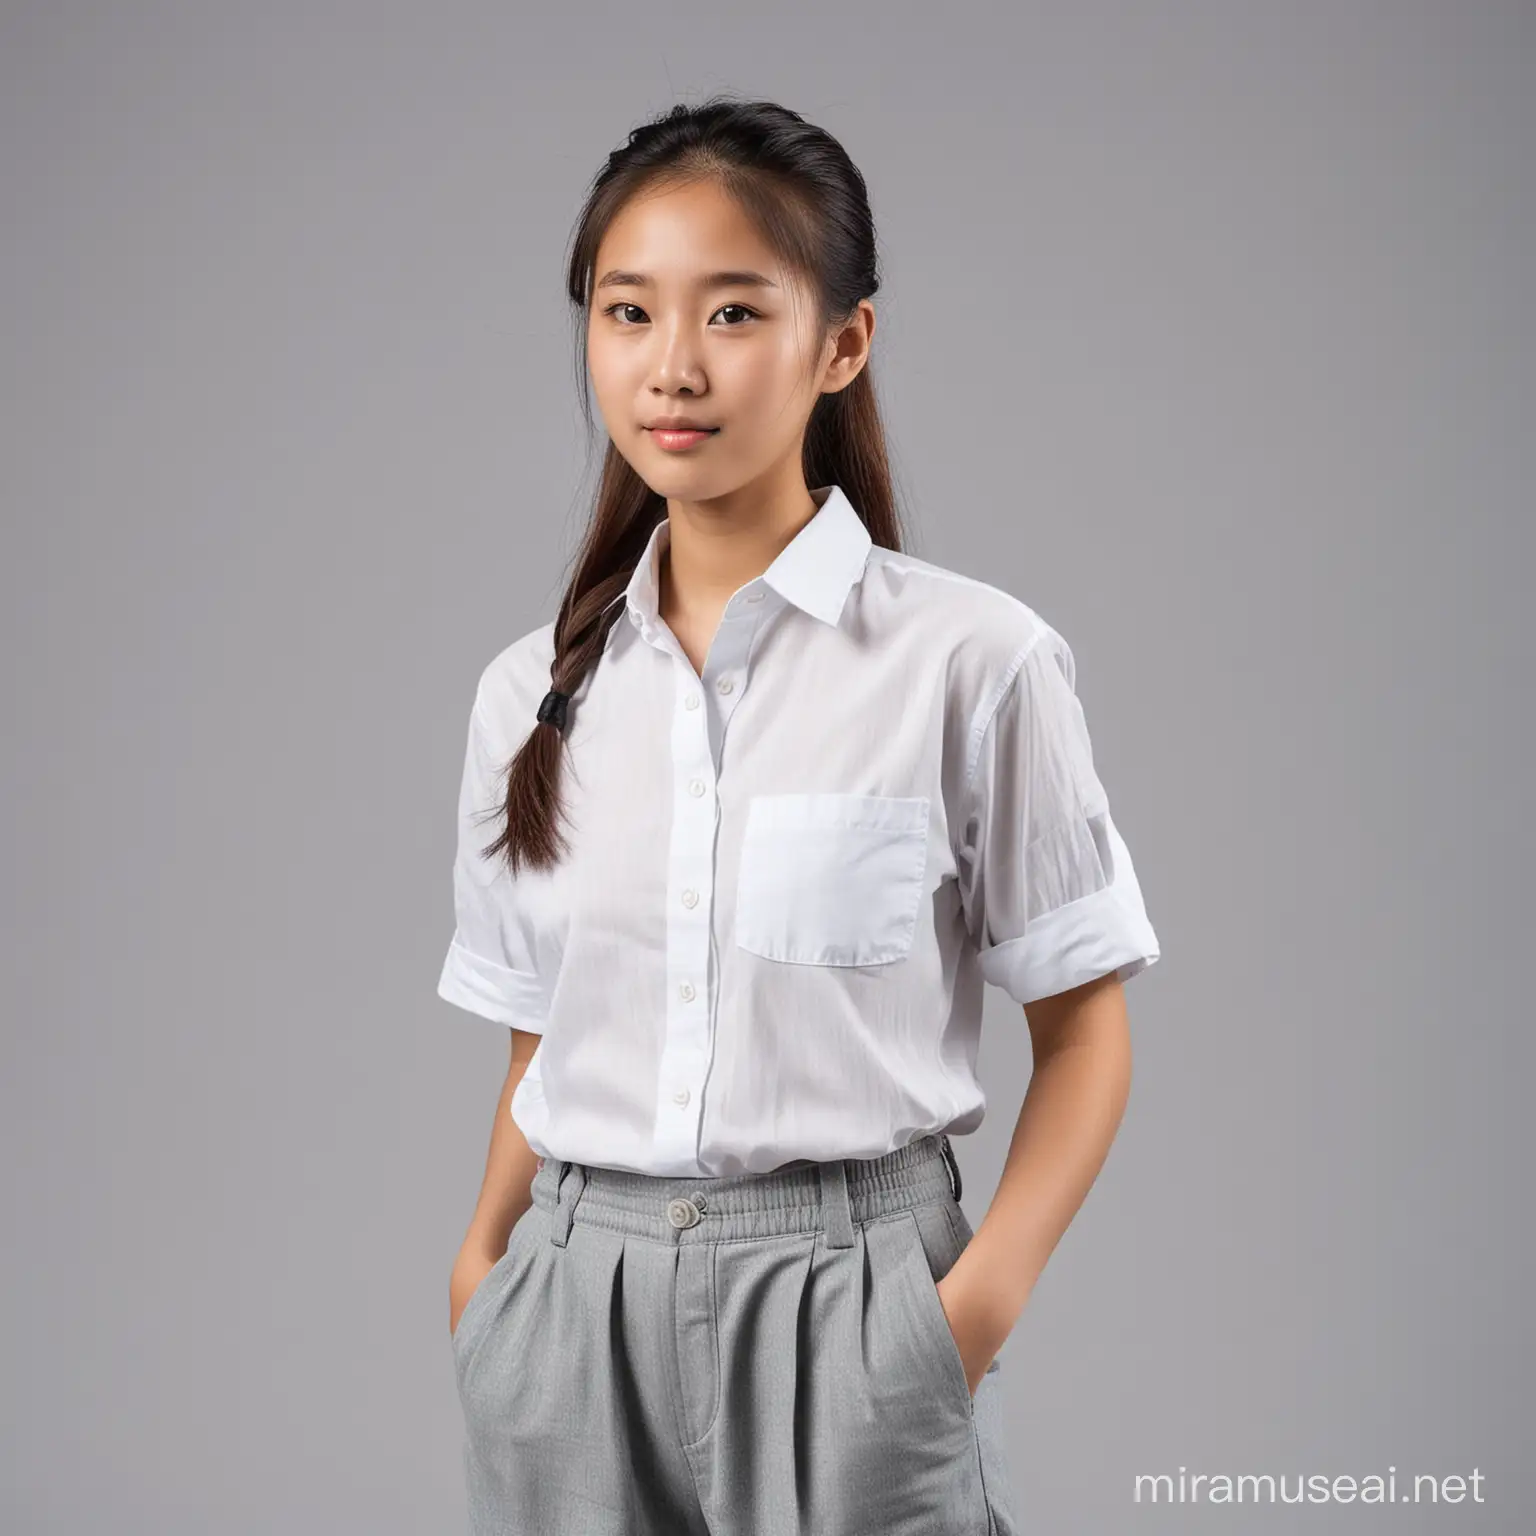 Young Asian Girl with Ponytail Wearing Casual Attire